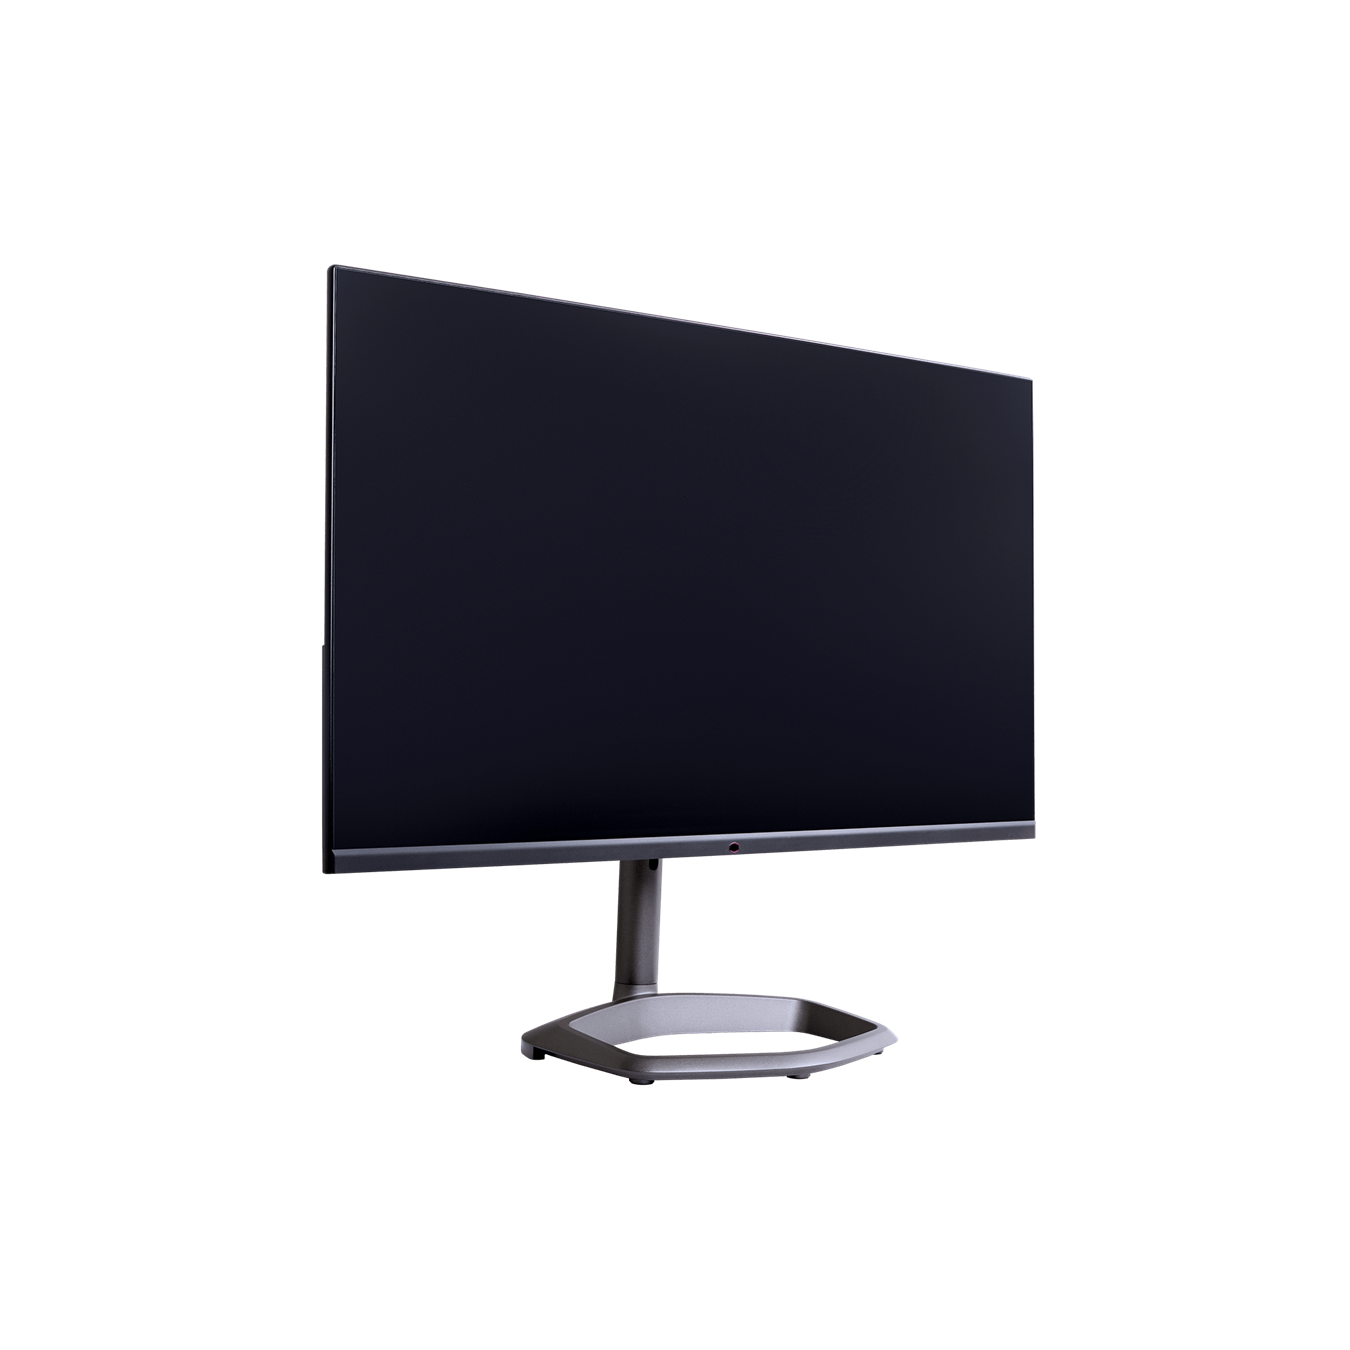 COOLER MASTER GM32-FQ 31.5&#8221; QHD IPS 165HZ, 1MS GAMING MONITOR